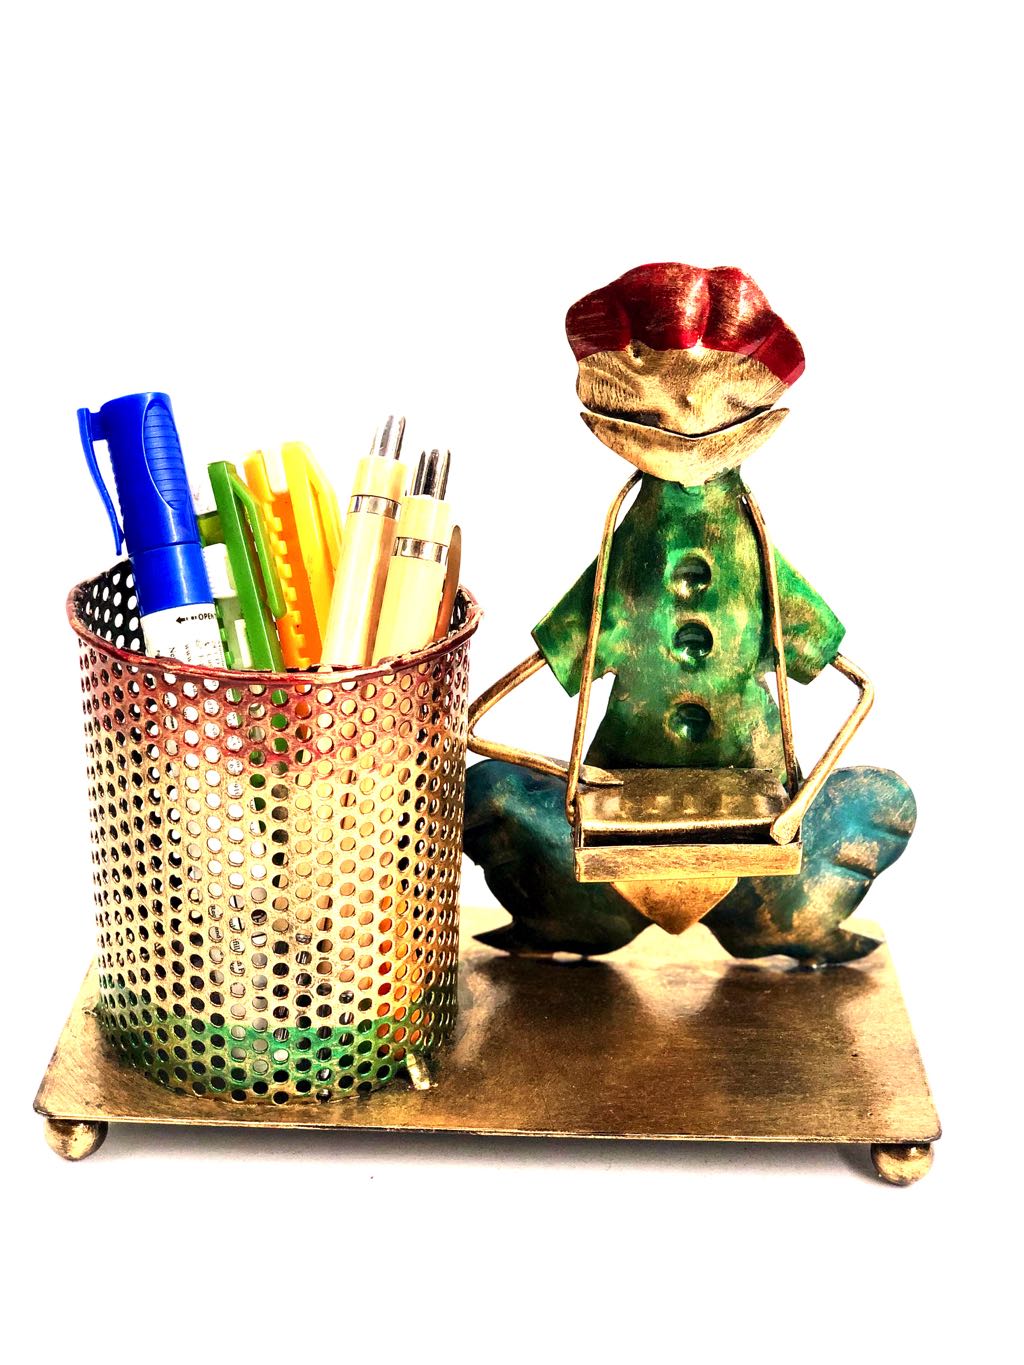 Creative Metal Pen Stand With Man Playing Musical Instrument From Tamrapatra